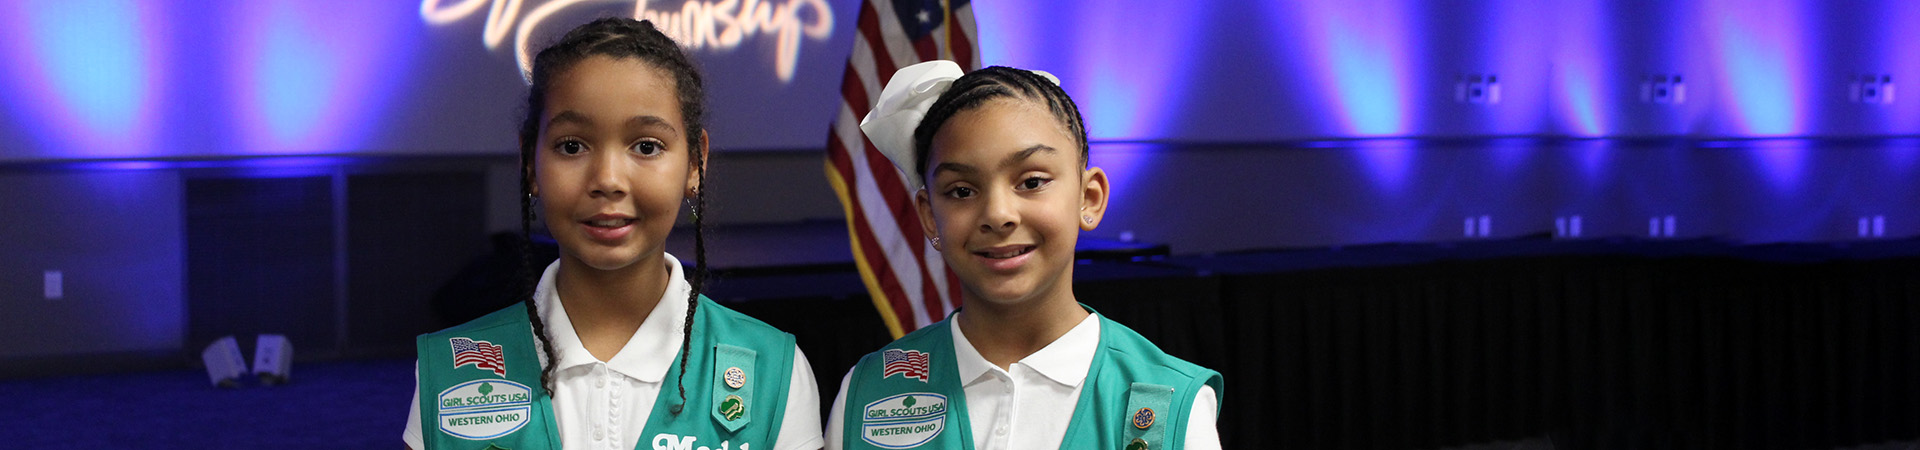  Two Local Girl Scouts Earn national Medal of Honor 